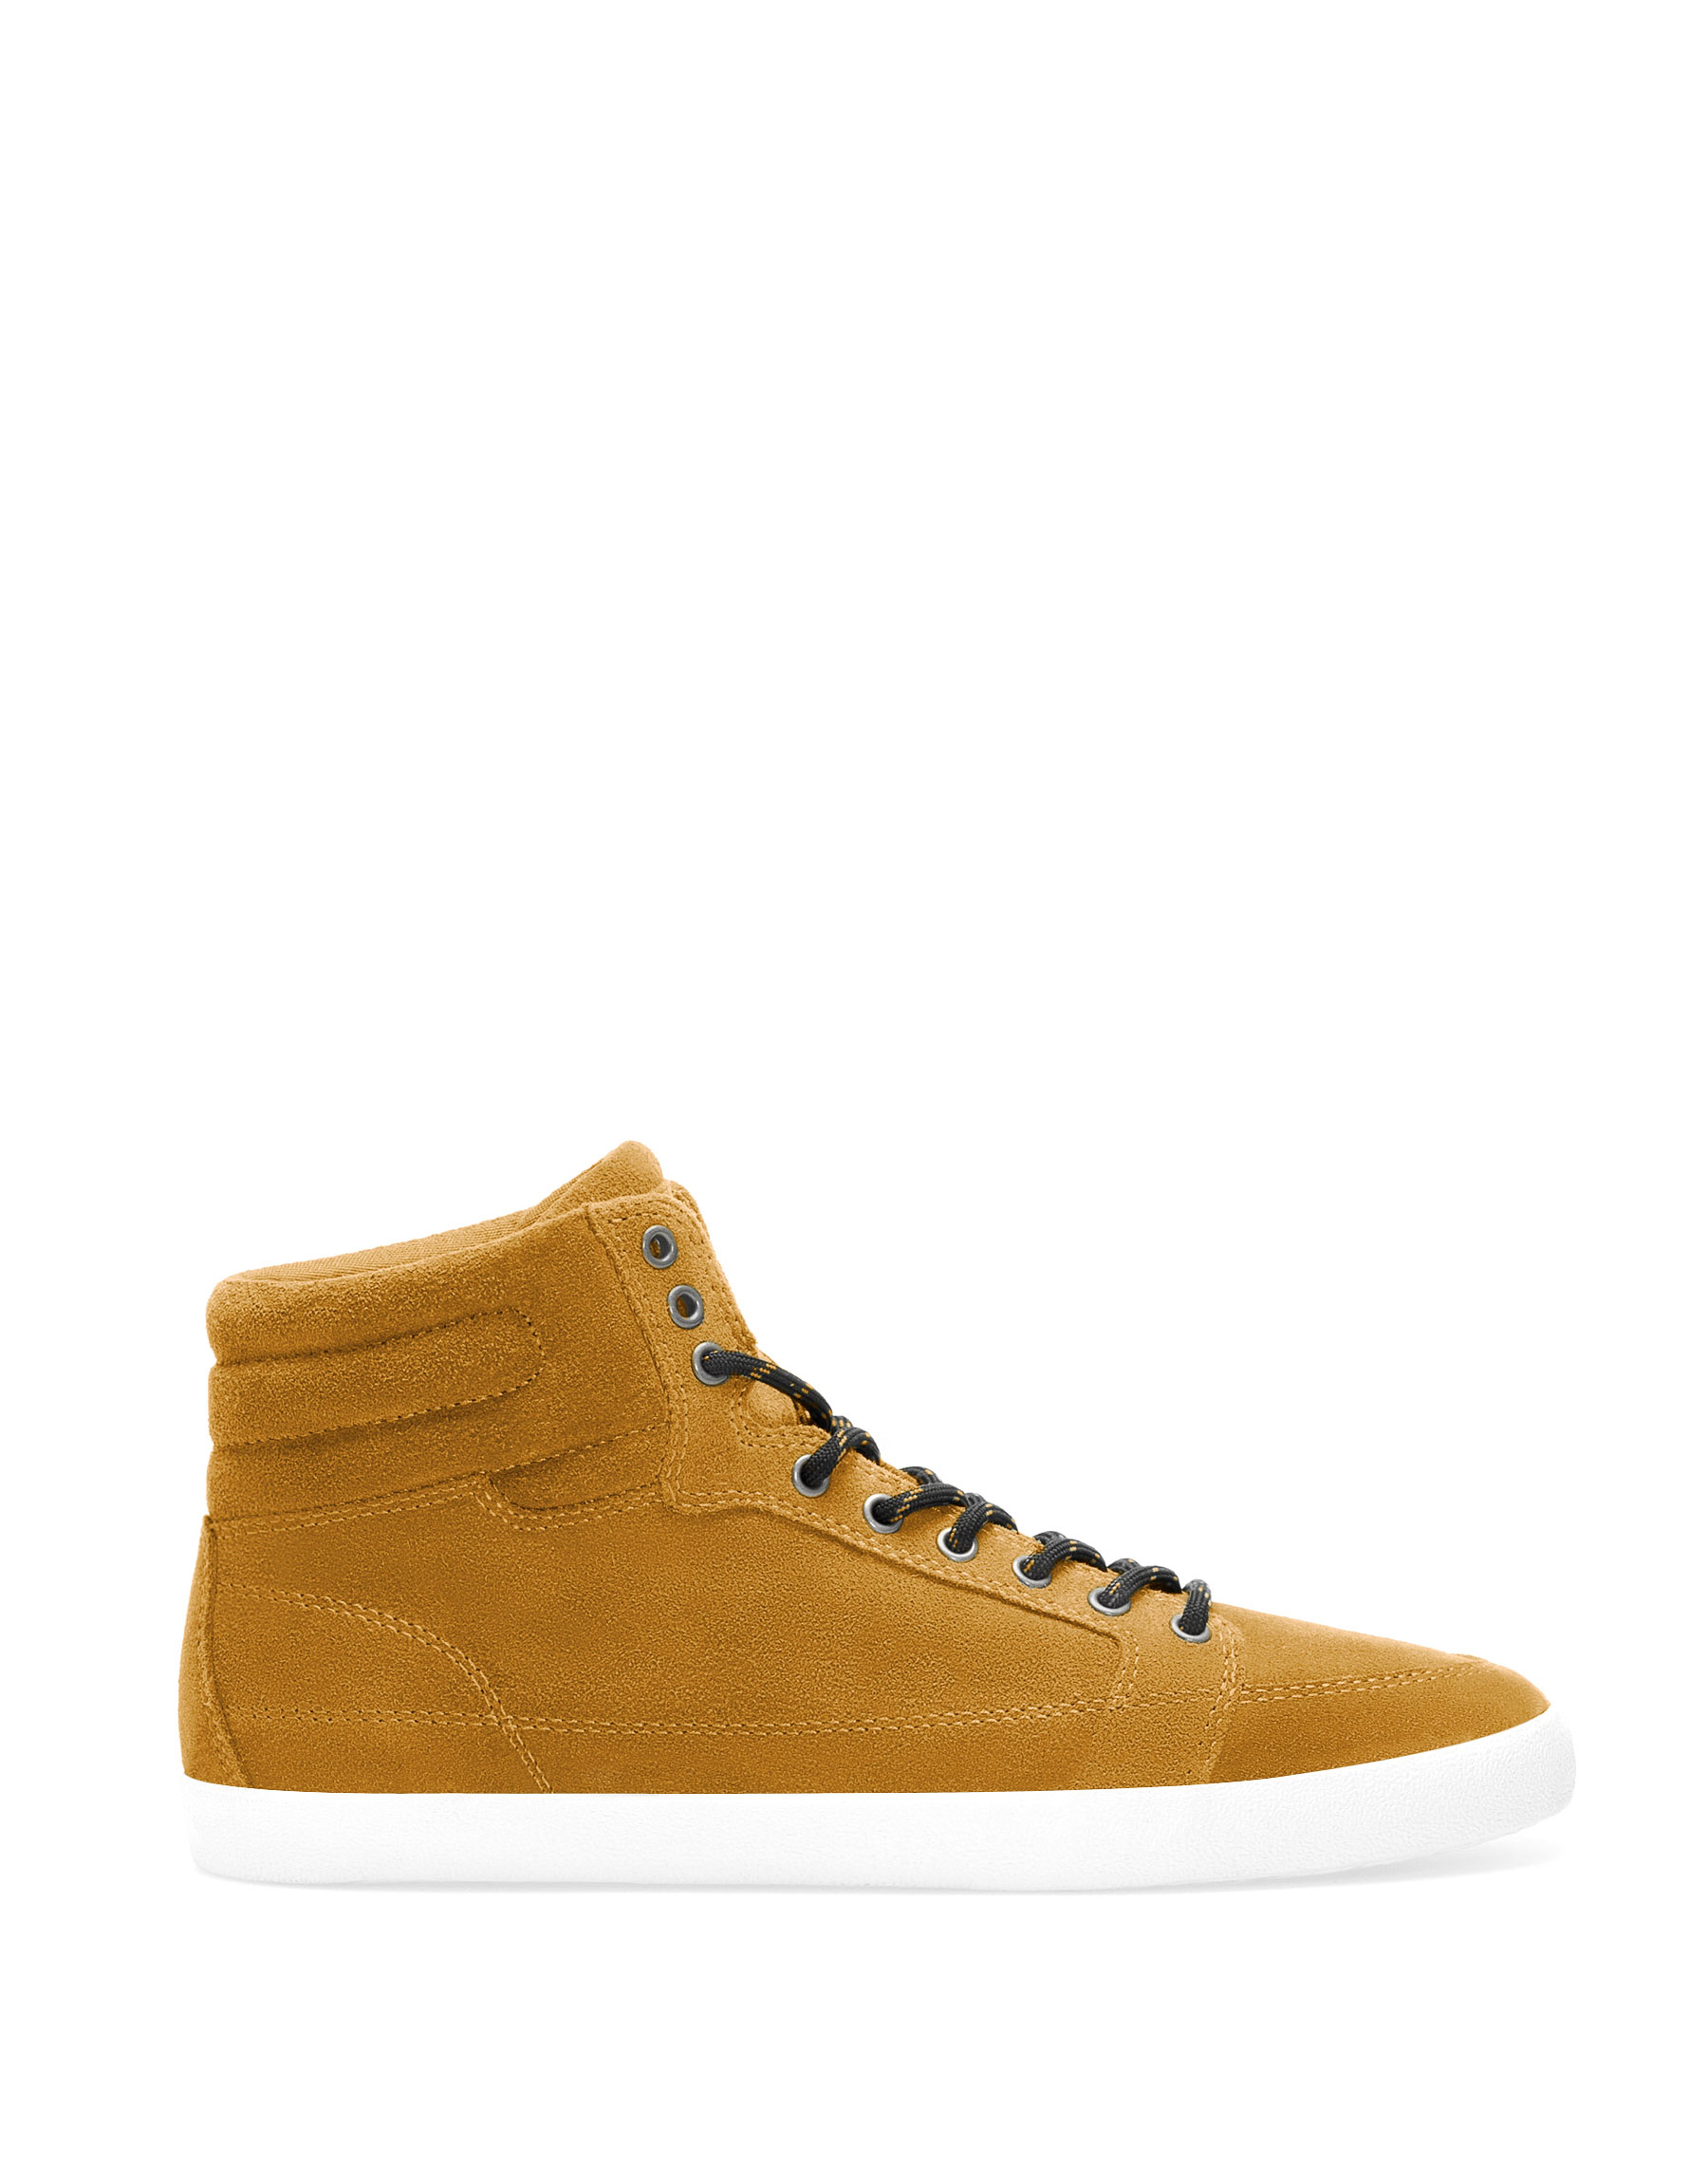 Pull&bear Suede Ankle Sneakers in Brown for Men (MUSTARD) | Lyst